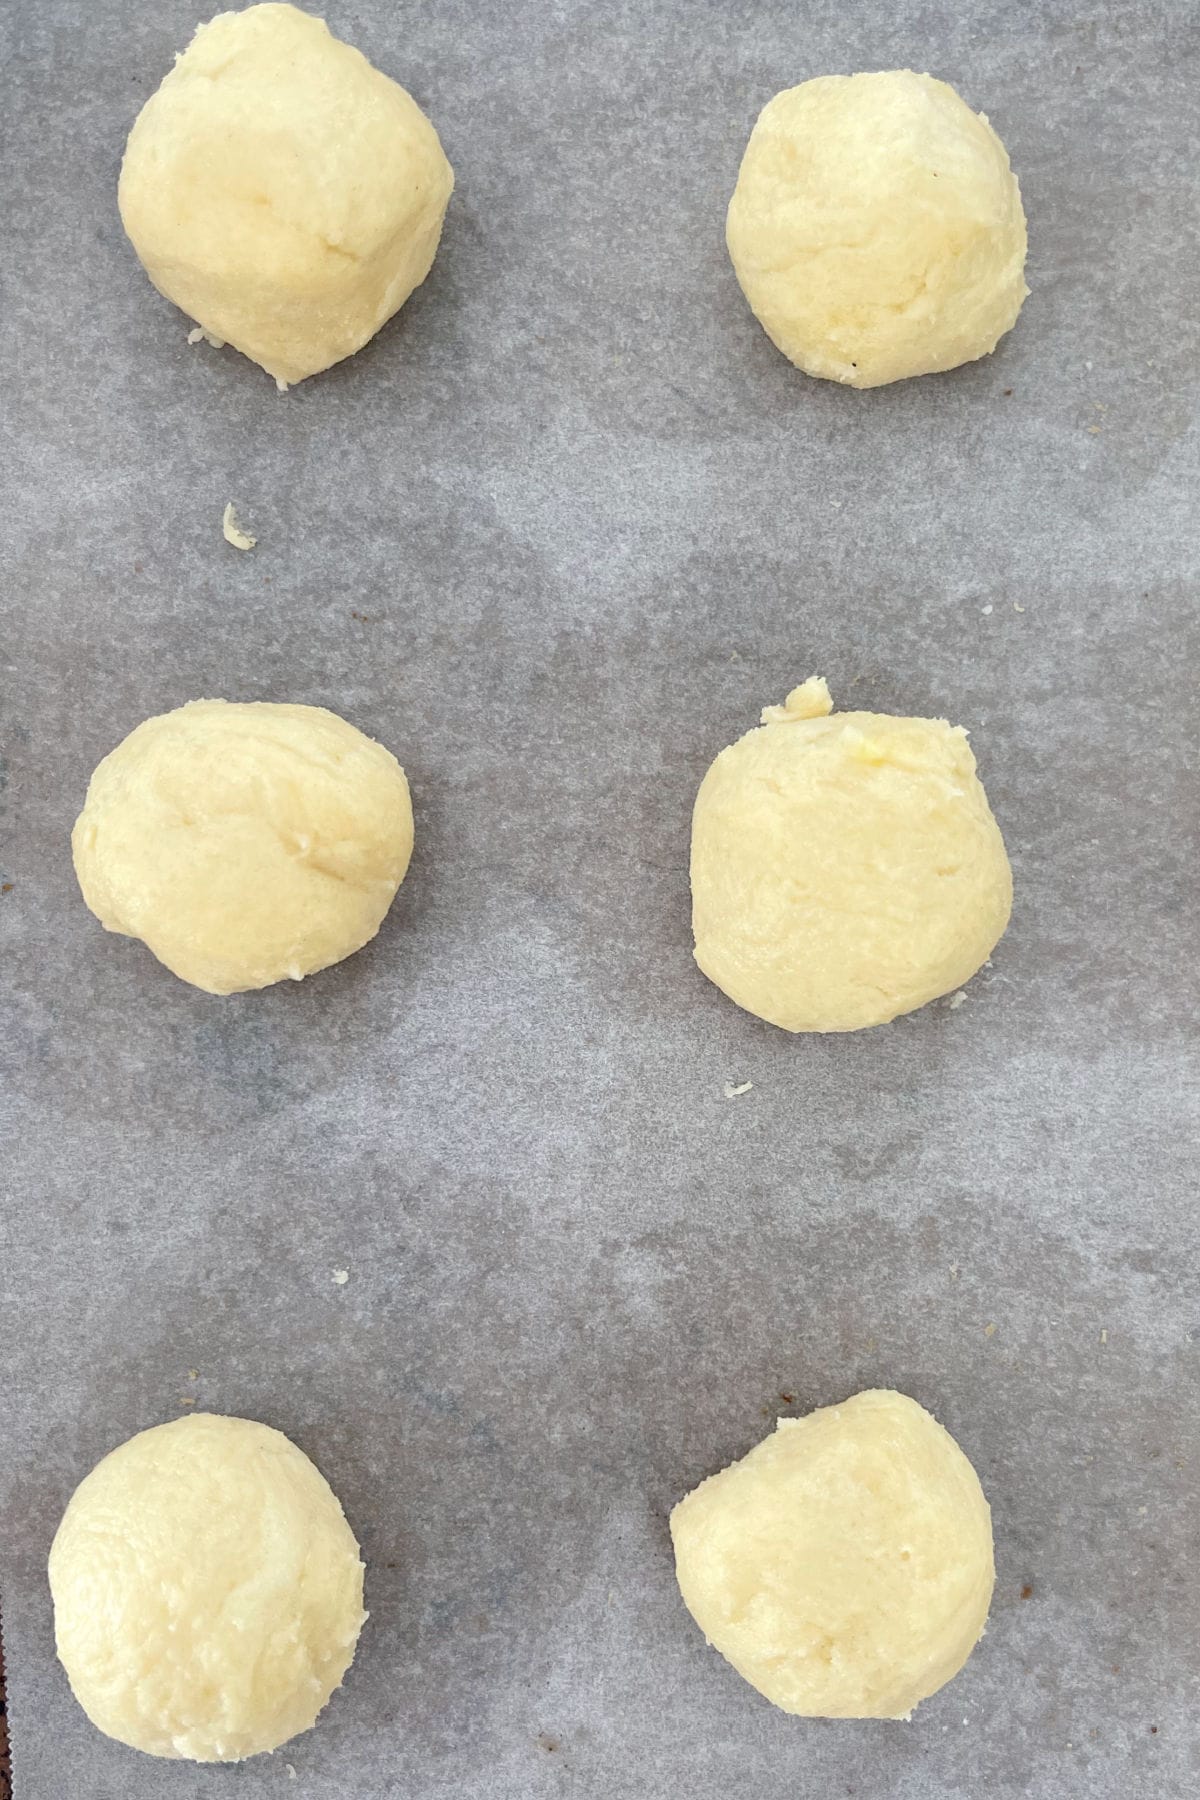 Christmas Biscuit dough on a baking tray.